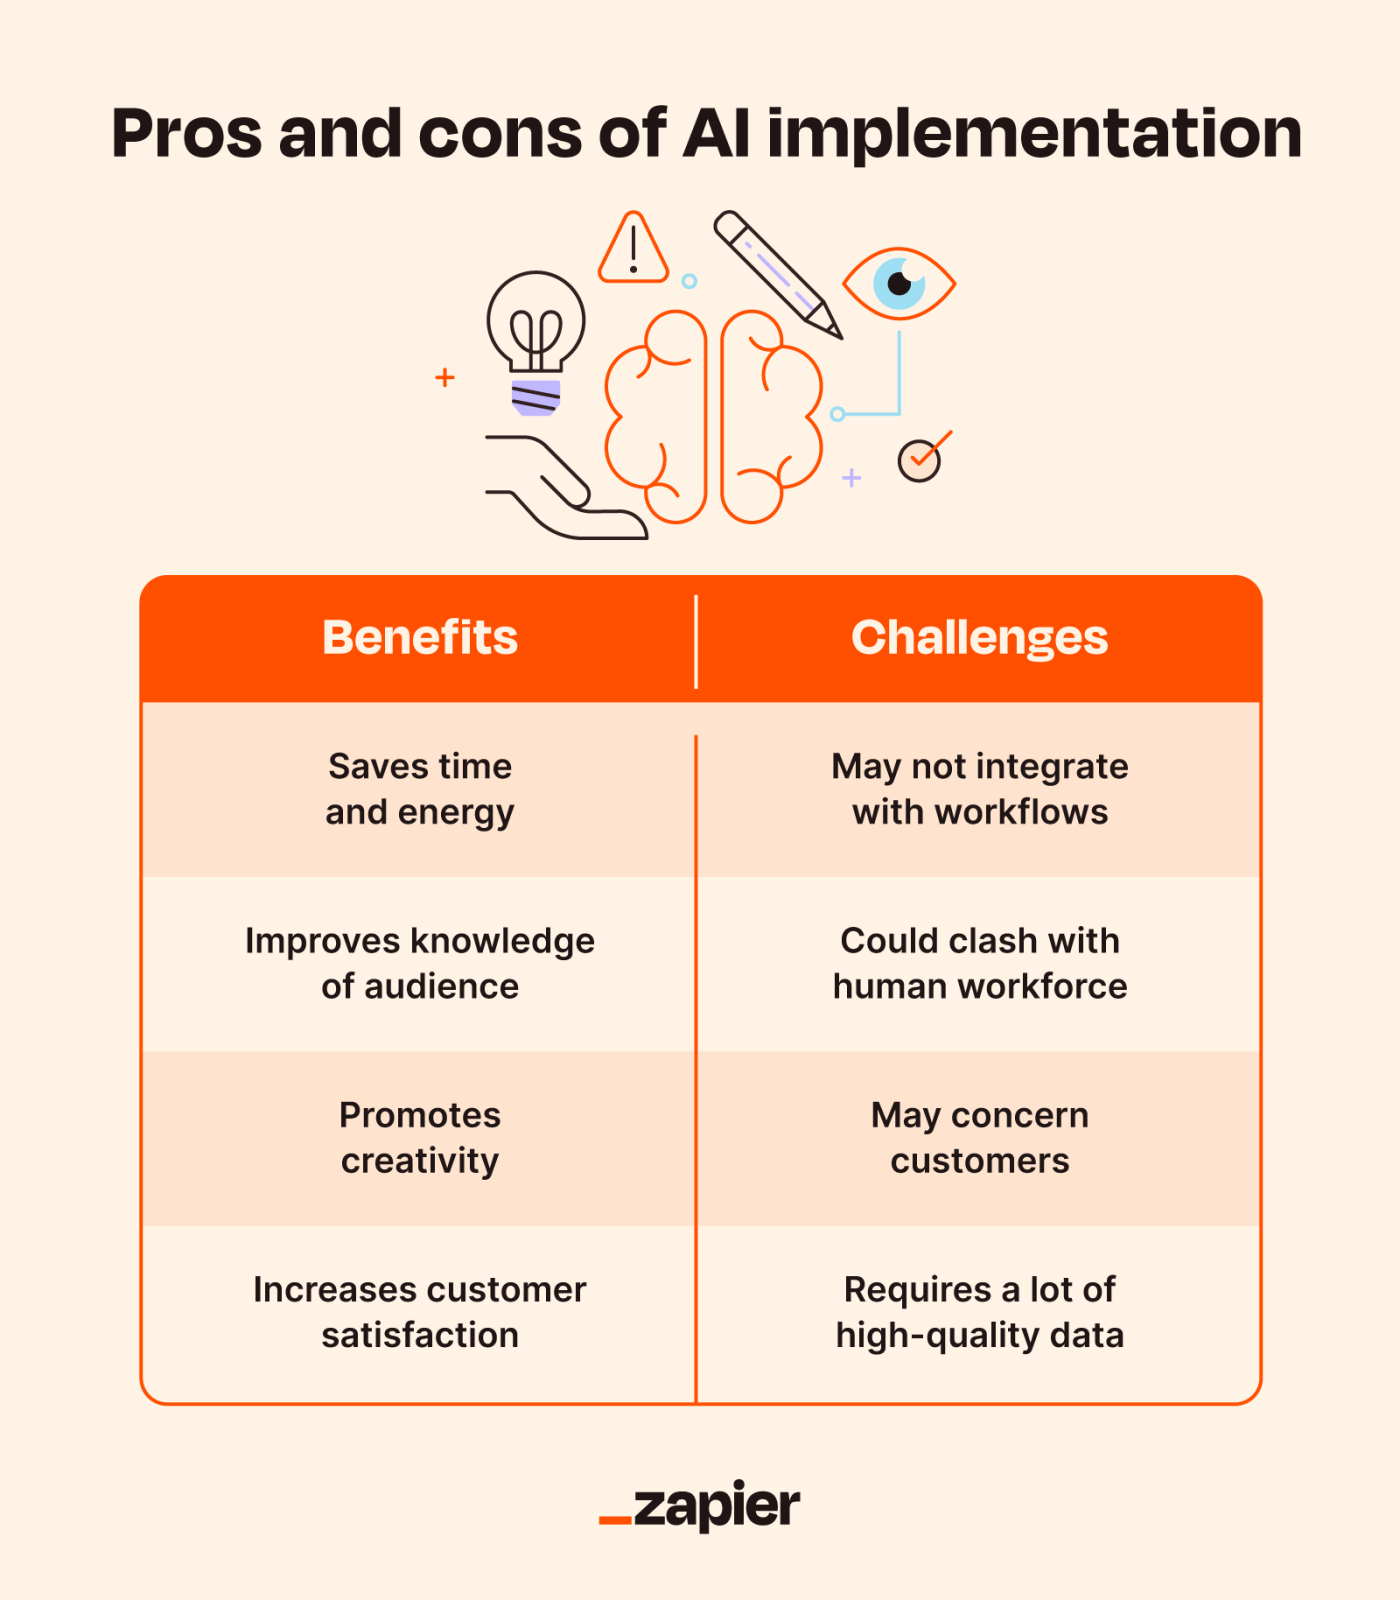 An illustrated list of the benefits and challenges that come with implementing AI